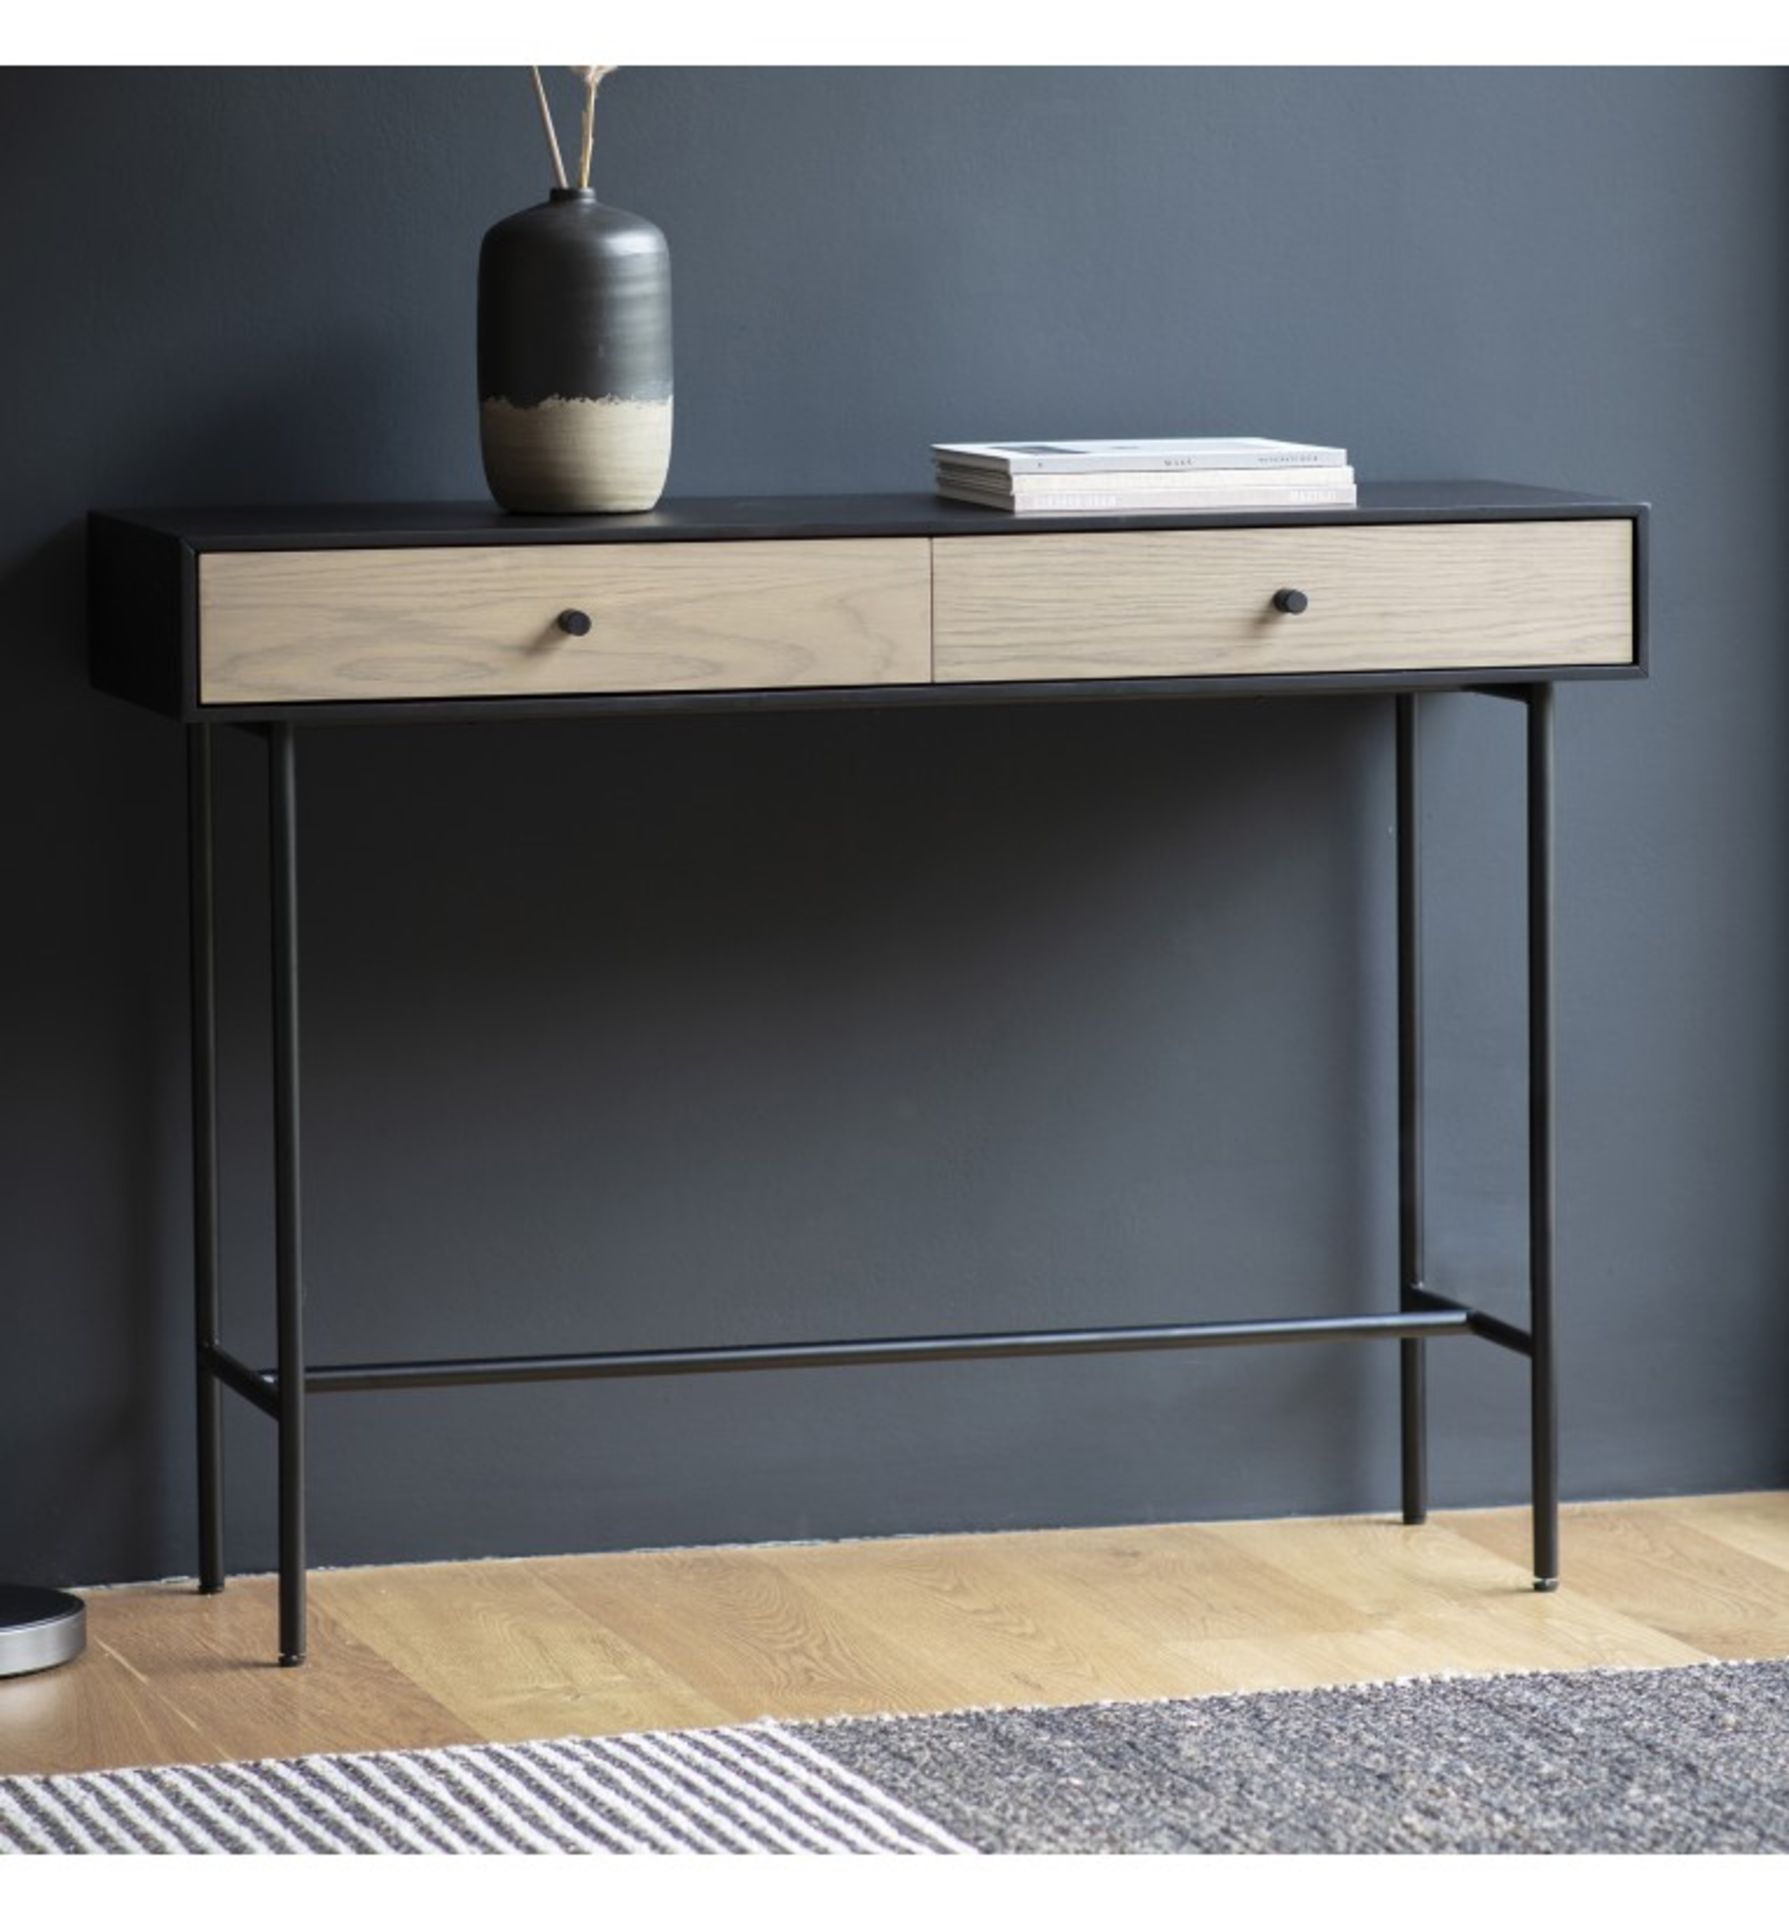 Carbury 2 Drawer Console Table The Carbury 2 Drawer Console Table Is The Latest Addition To Our